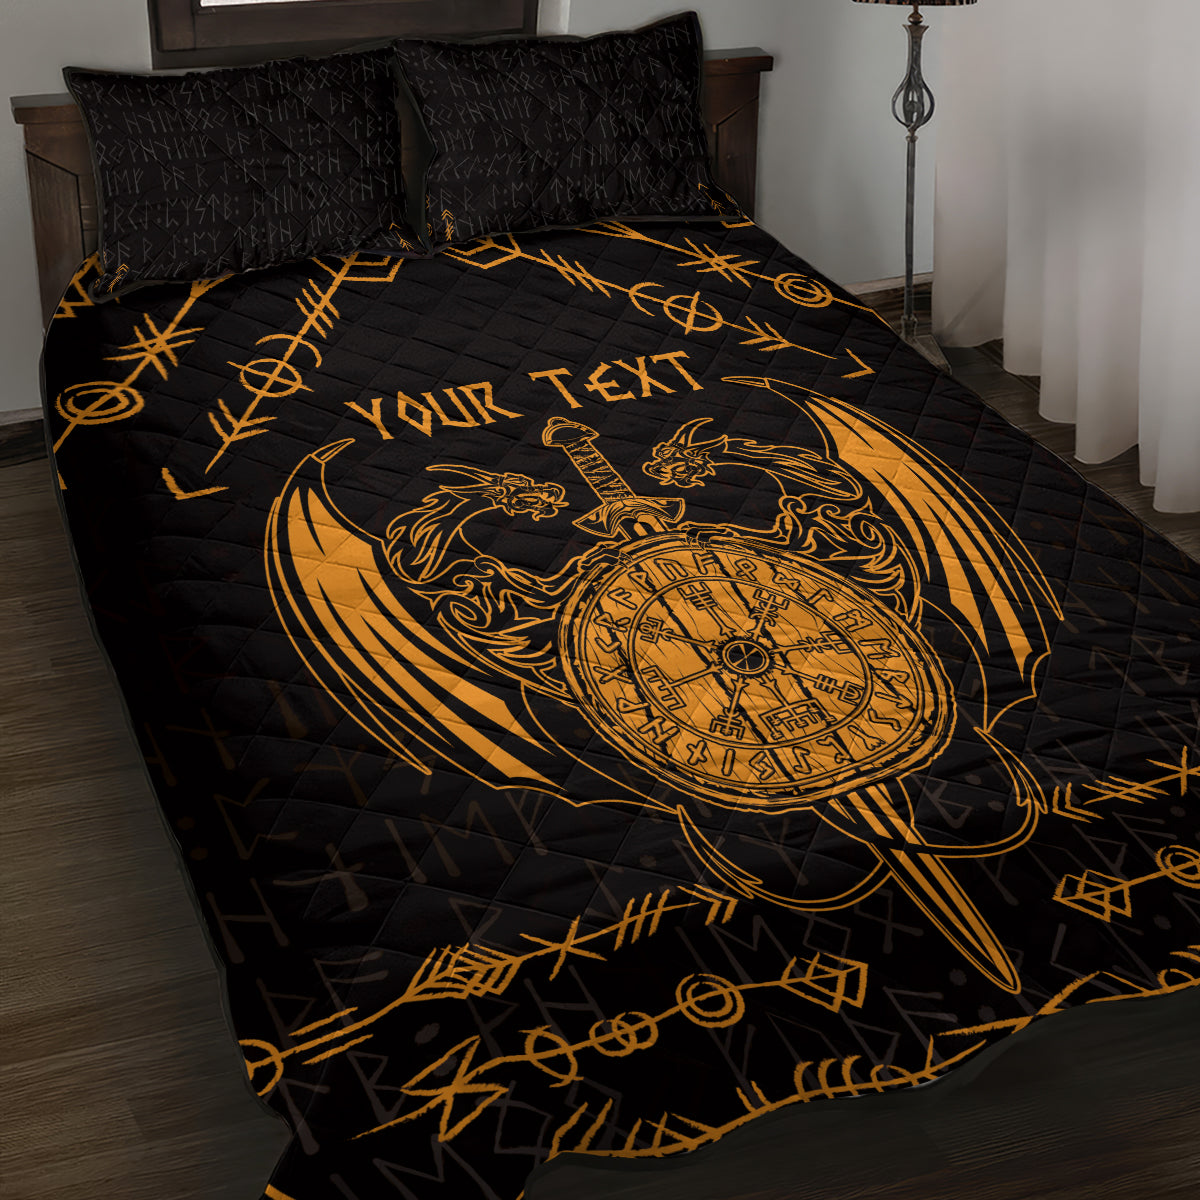 Personalized Viking Dragon Quilt Bed Set with Sword Gold Scandinavian Tattoo